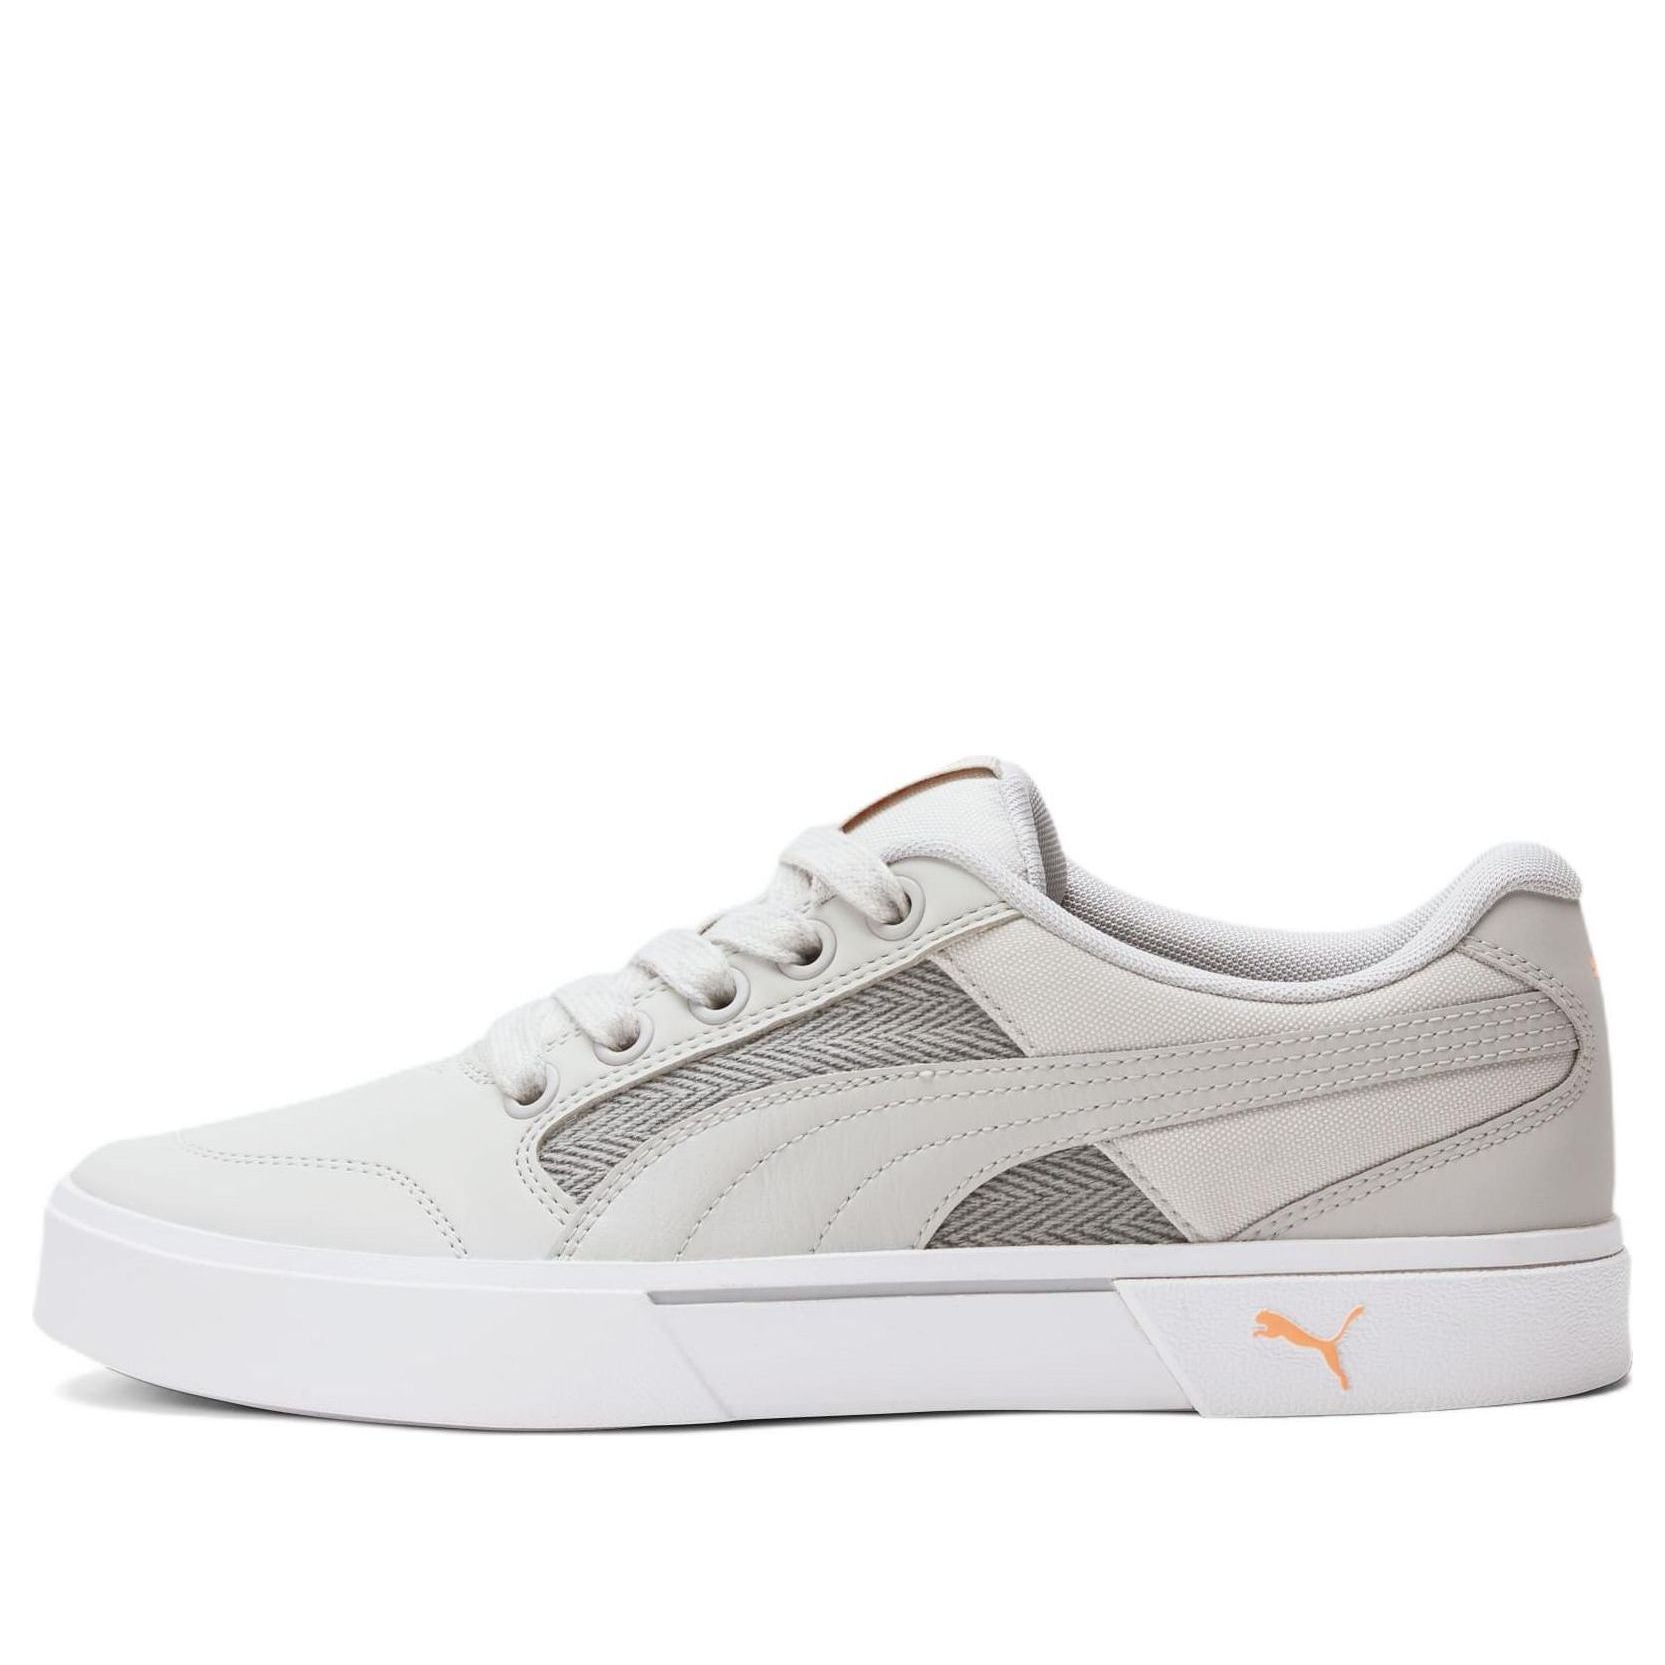 PUMA C-Rey Atypical Casual Skateboarding Shoes Unisex Gray 